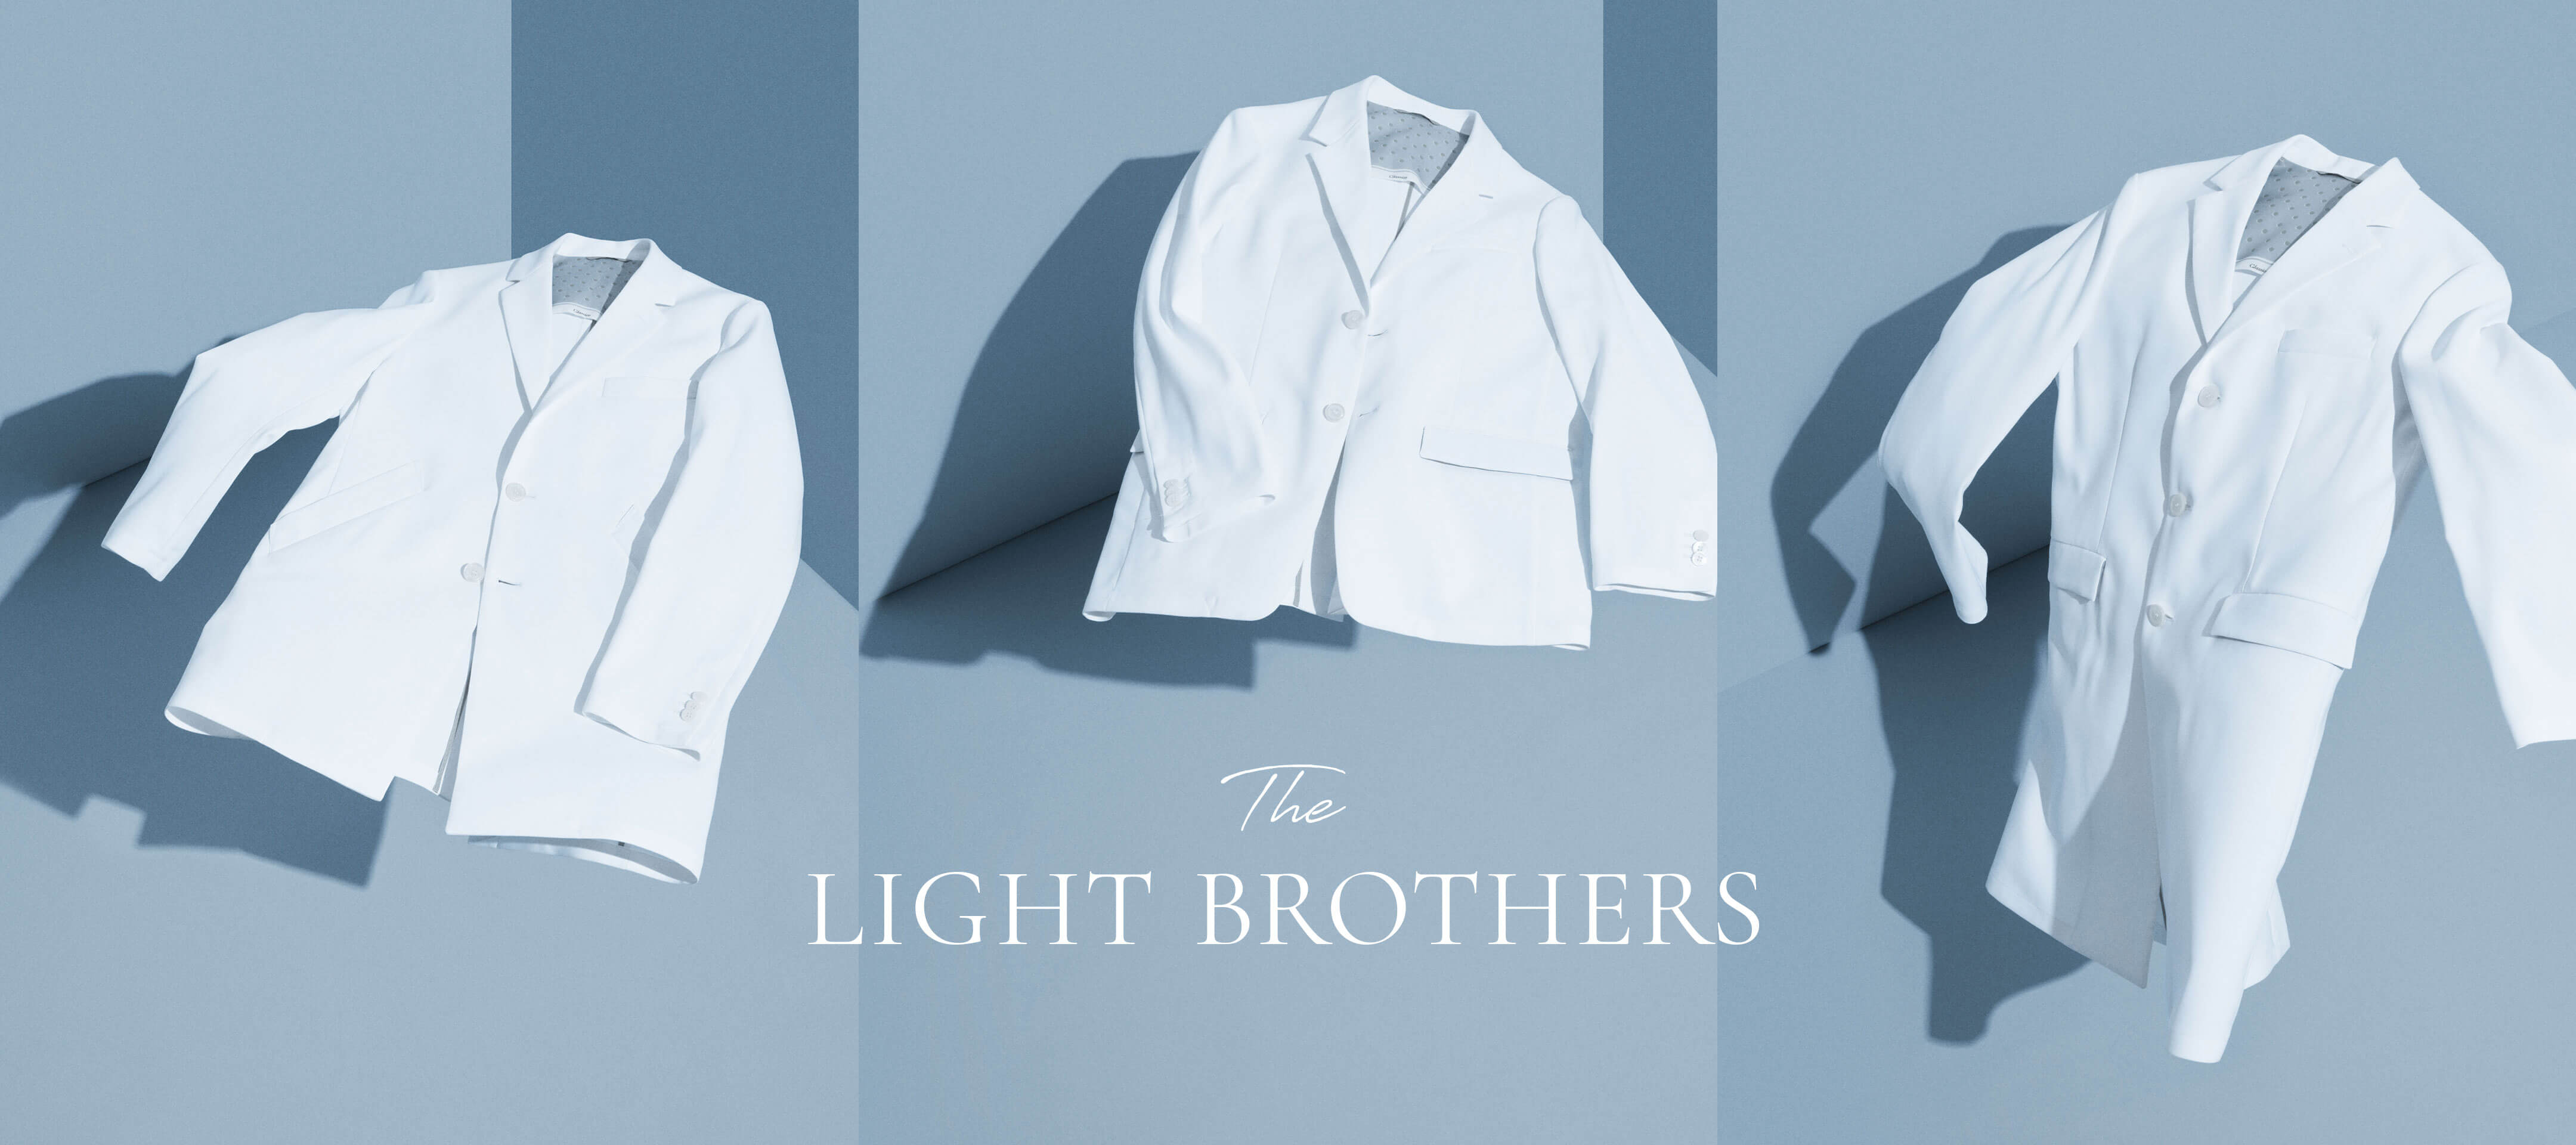 The LIGHT BROTHERS